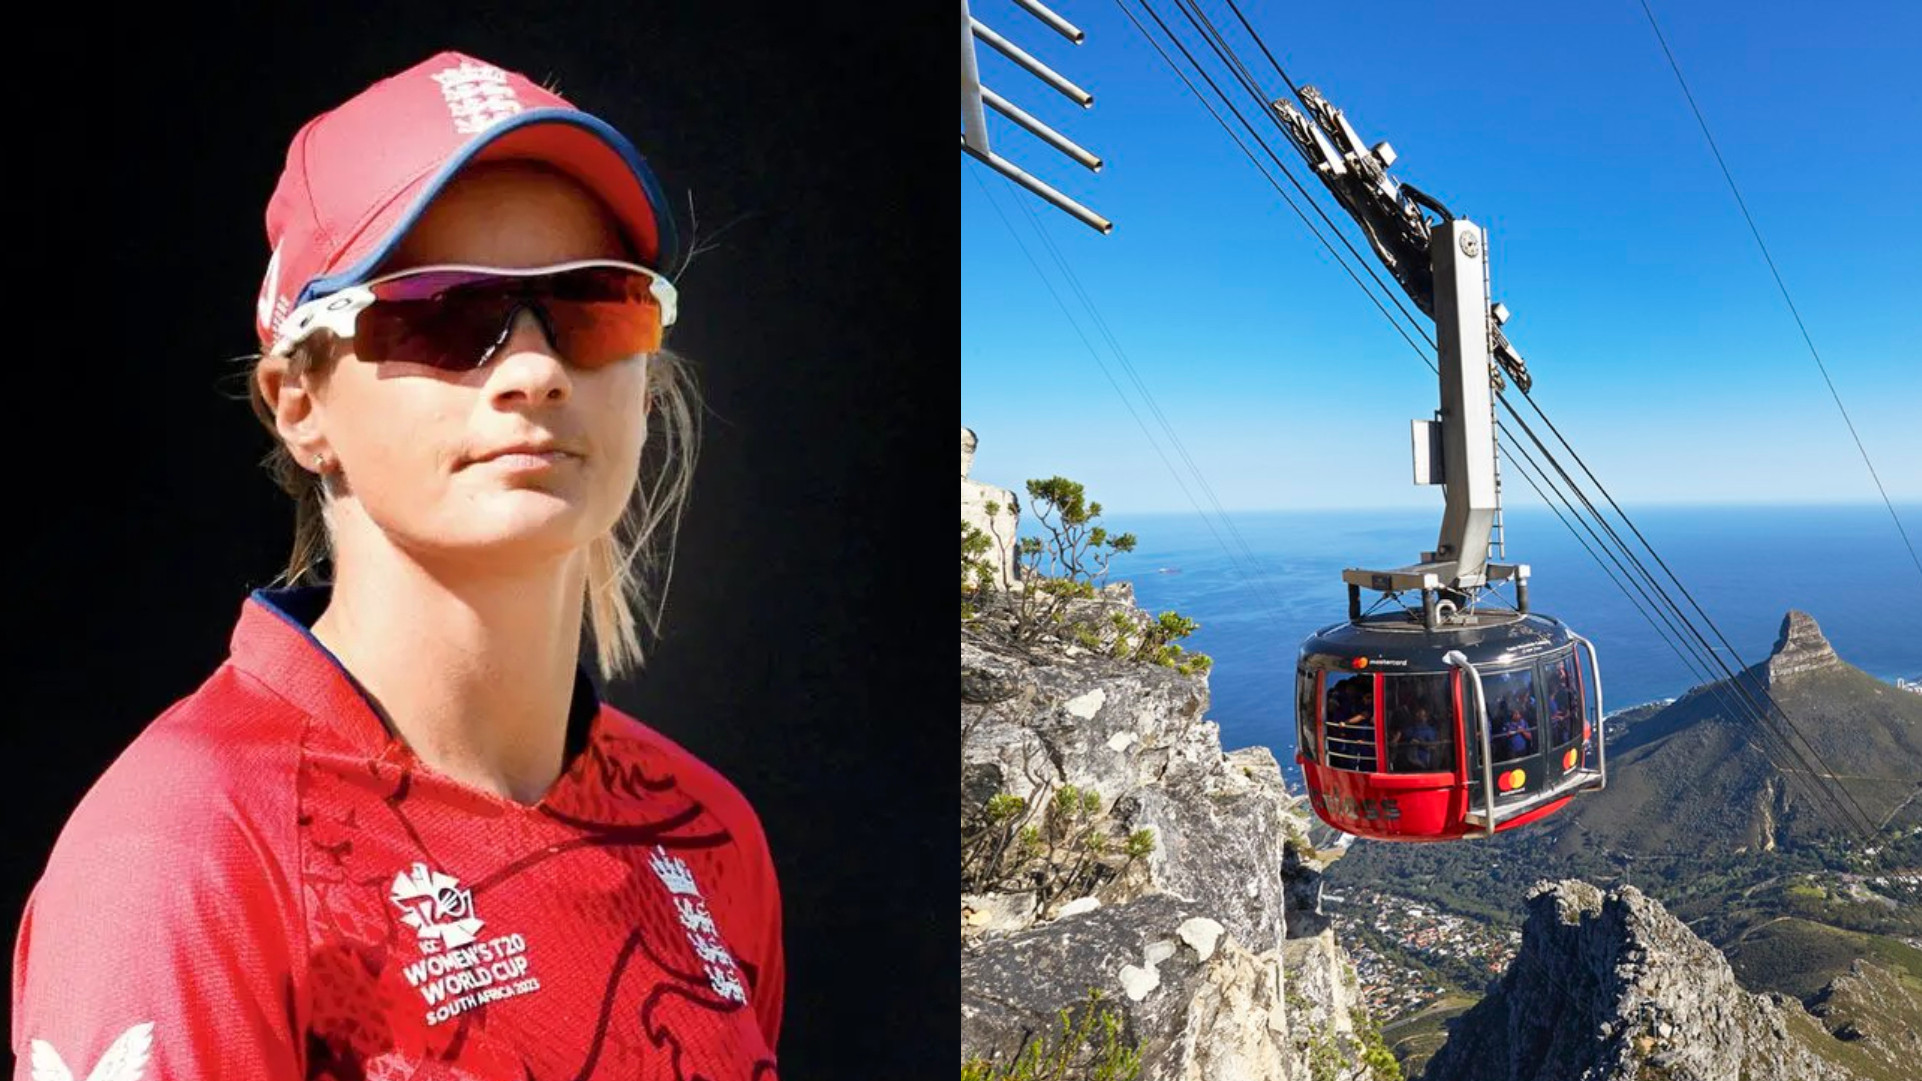 “Next time, I’ll take the stairs”- Danielle Wyatt has scary experience on Table Top mountain cable car ride